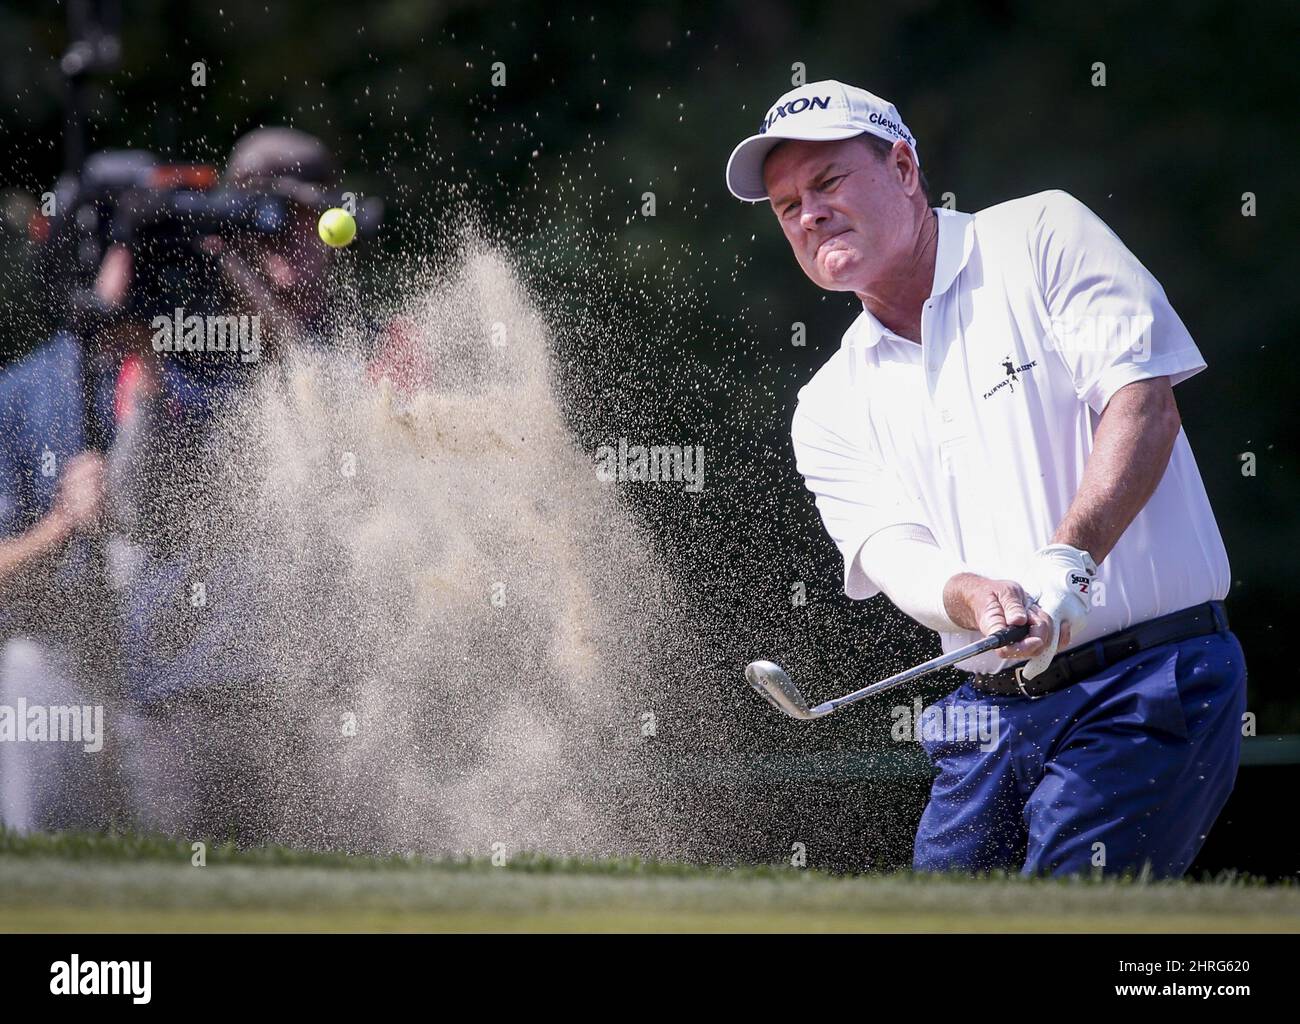 Joe Durant, of the United States, hits from a sand trap on the seventh hole during the final round of the PGA Tour Champions Shaw Charity Classic golf event in Calgary, Alta.,